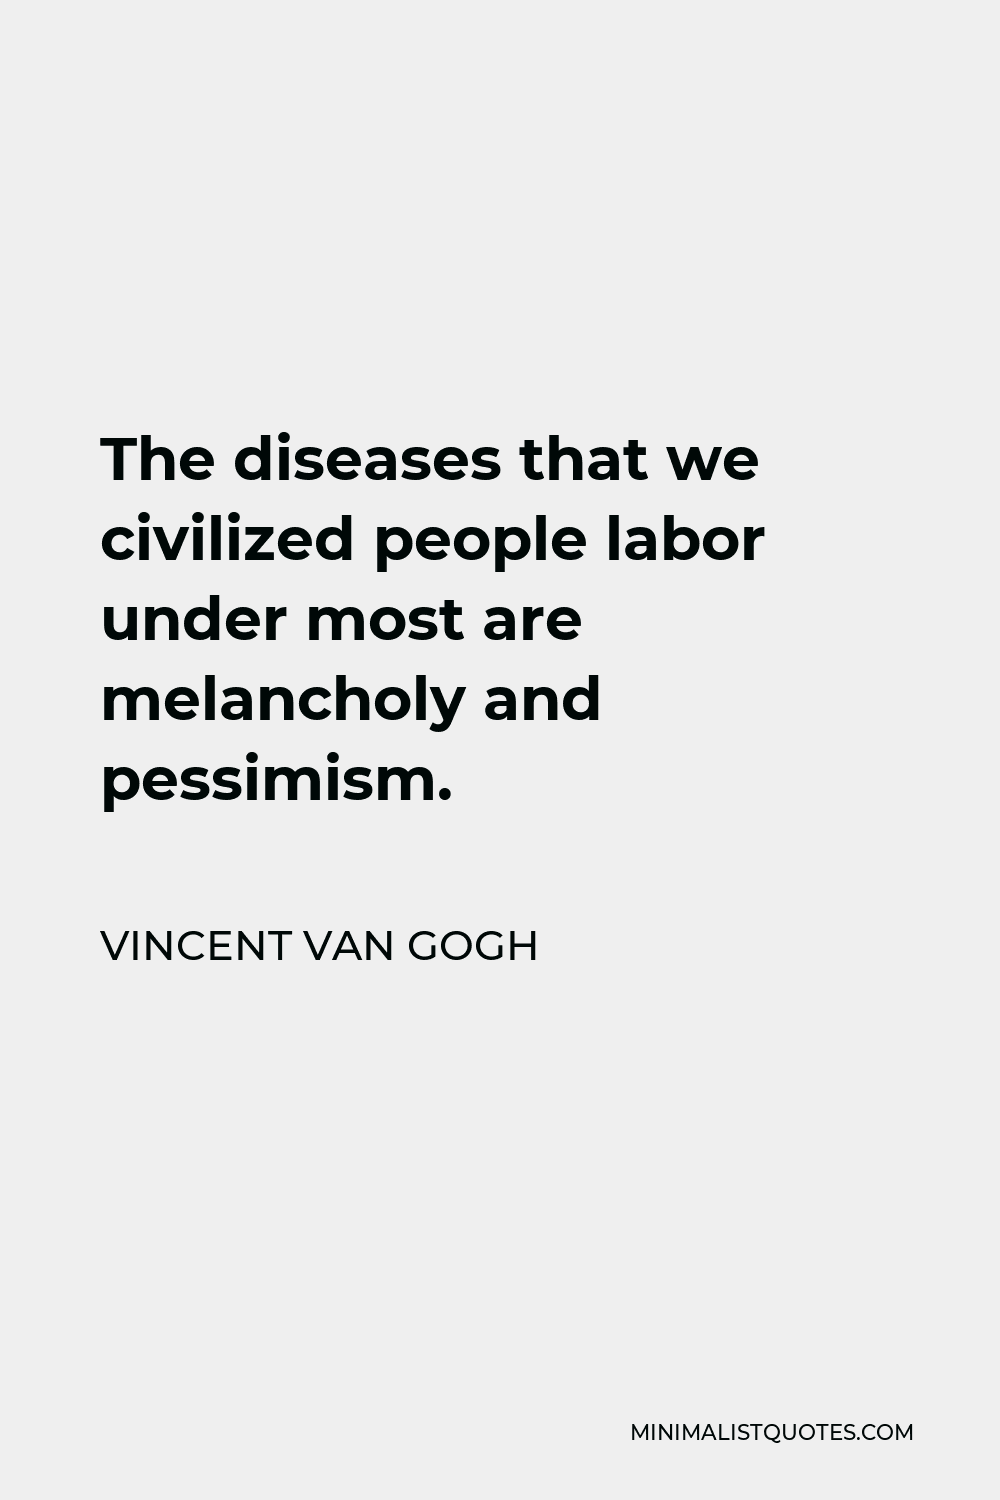 Vincent Van Gogh Quote - The diseases that we civilized people labor under most are melancholy and pessimism.